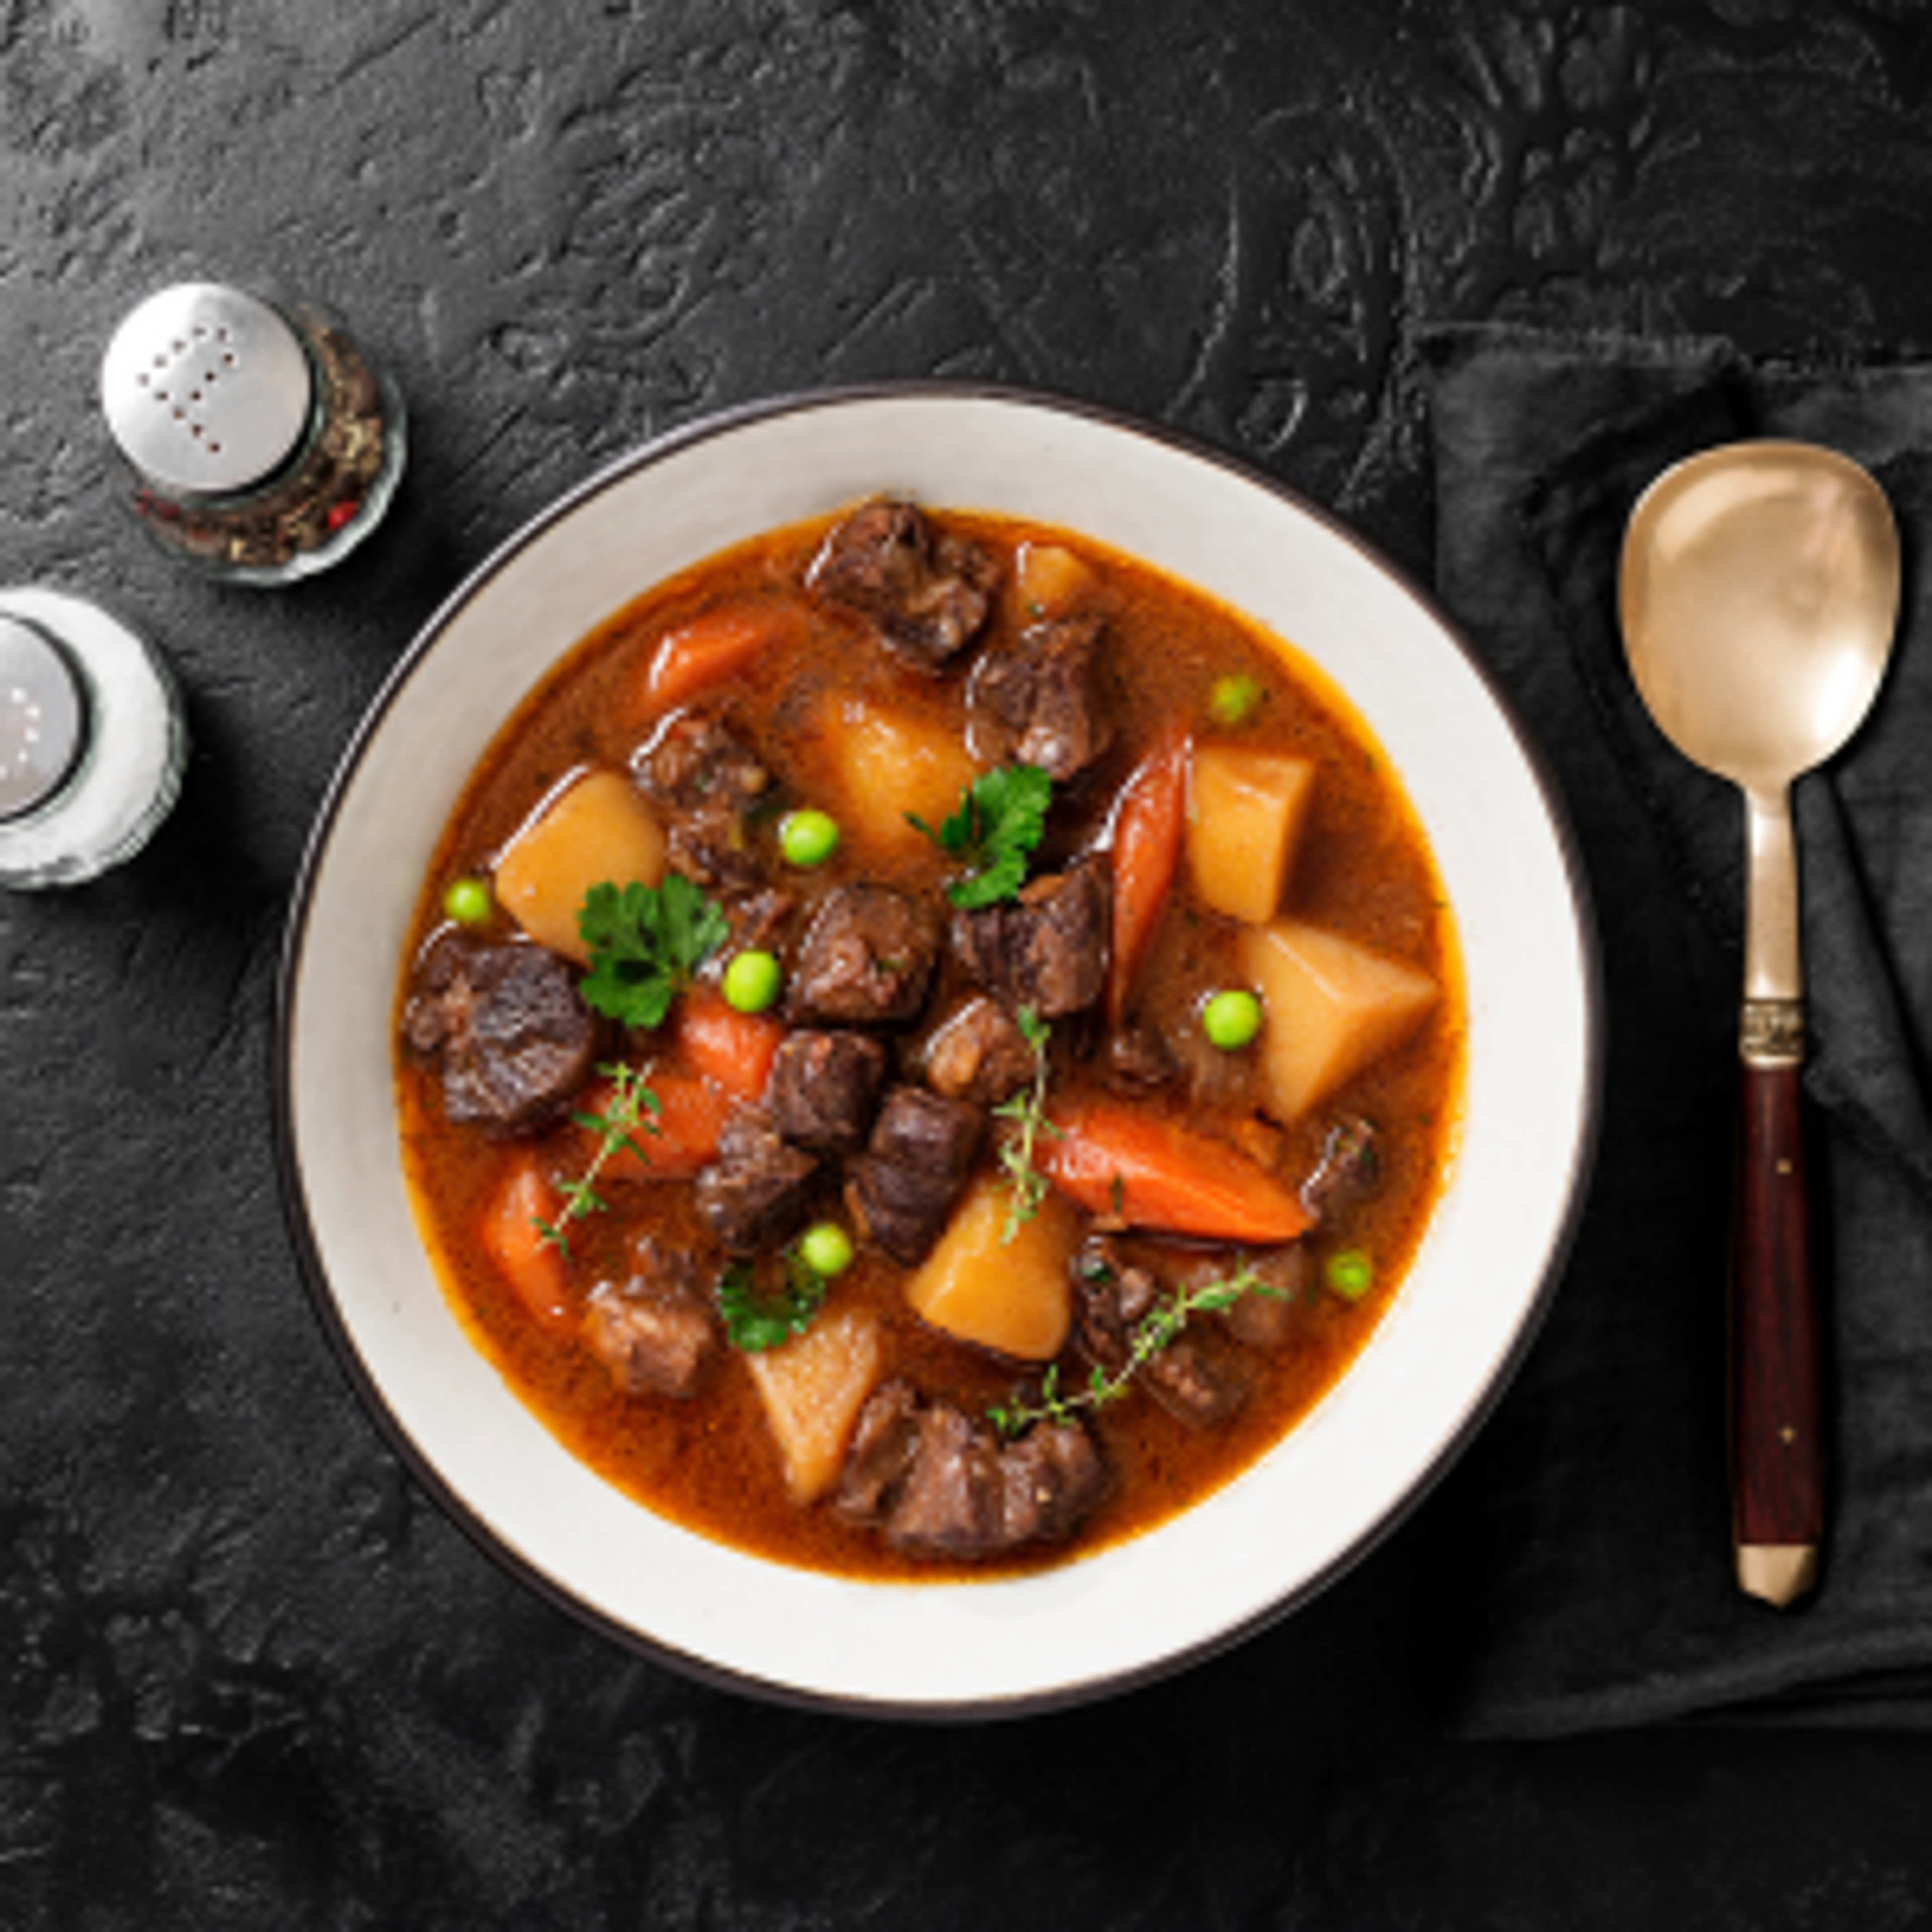 A hearty Irish Stew, served in the winter to warm yourself